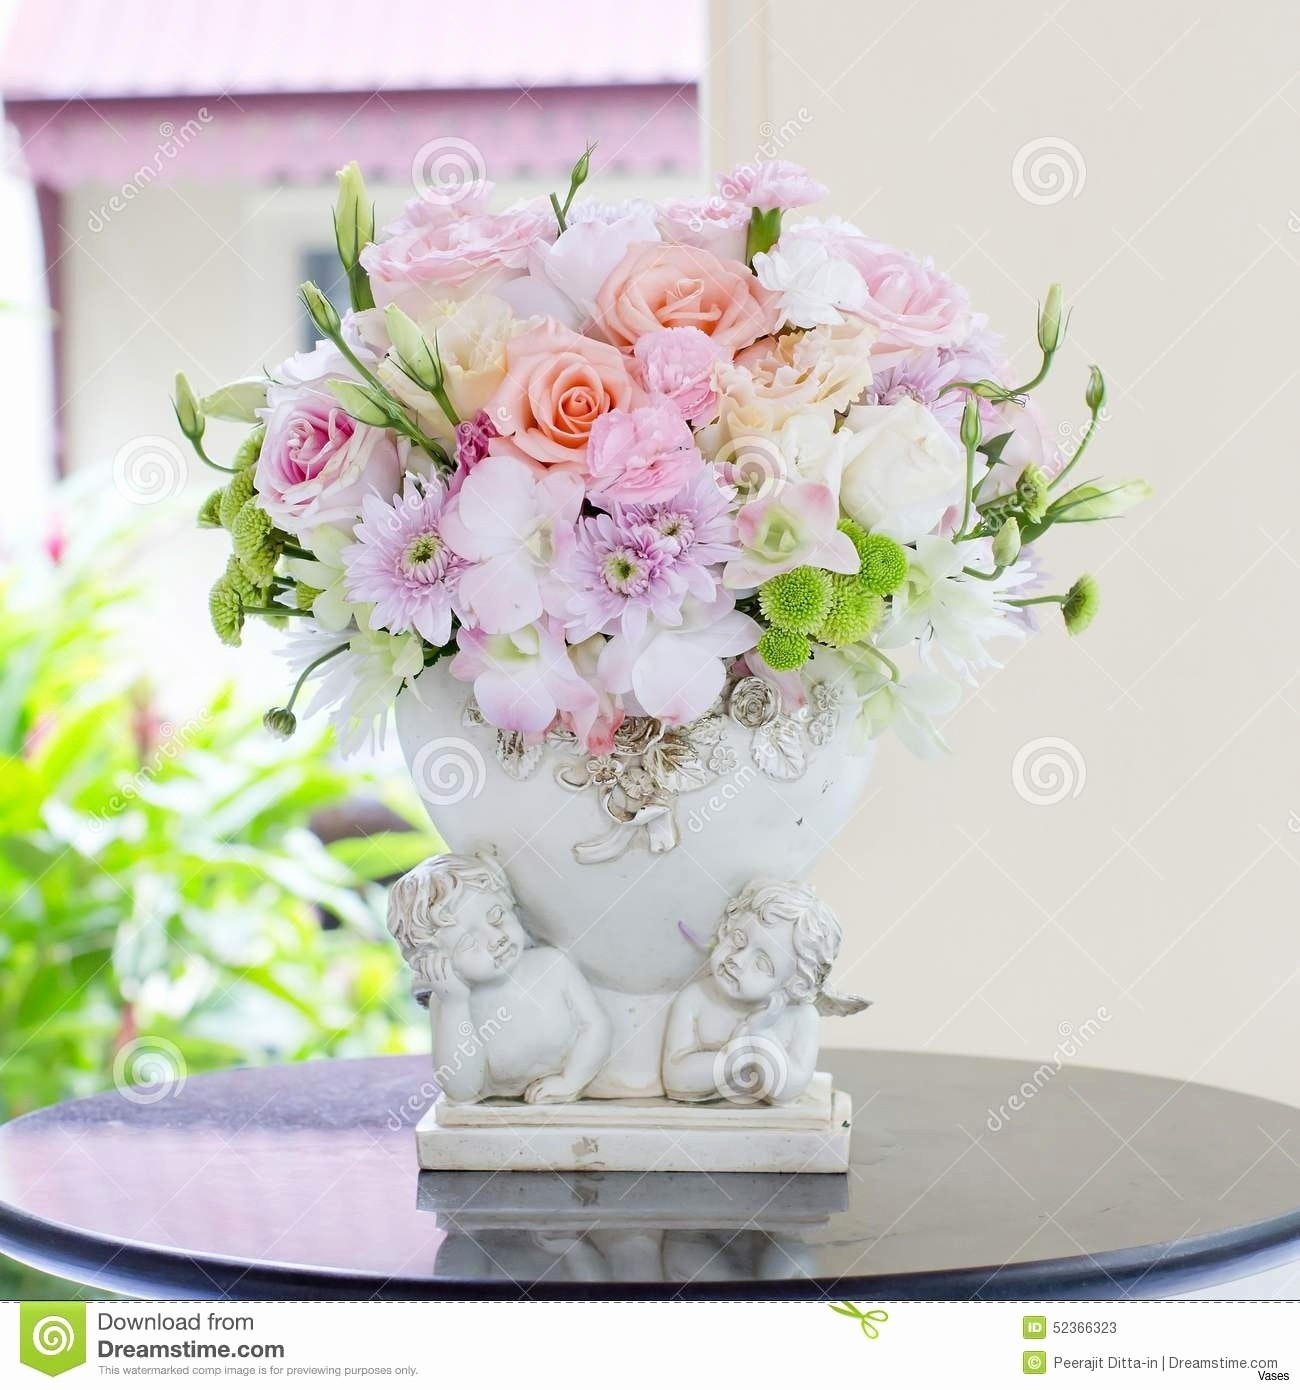 16 Best Pictures Of Flowers In A Vase 2022 free download pictures of flowers in a vase of beautiful flowers flower nature wallpaper images fresh beautiful intended for beautiful flowers flower nature wallpaper images fresh beautiful flowers lovely